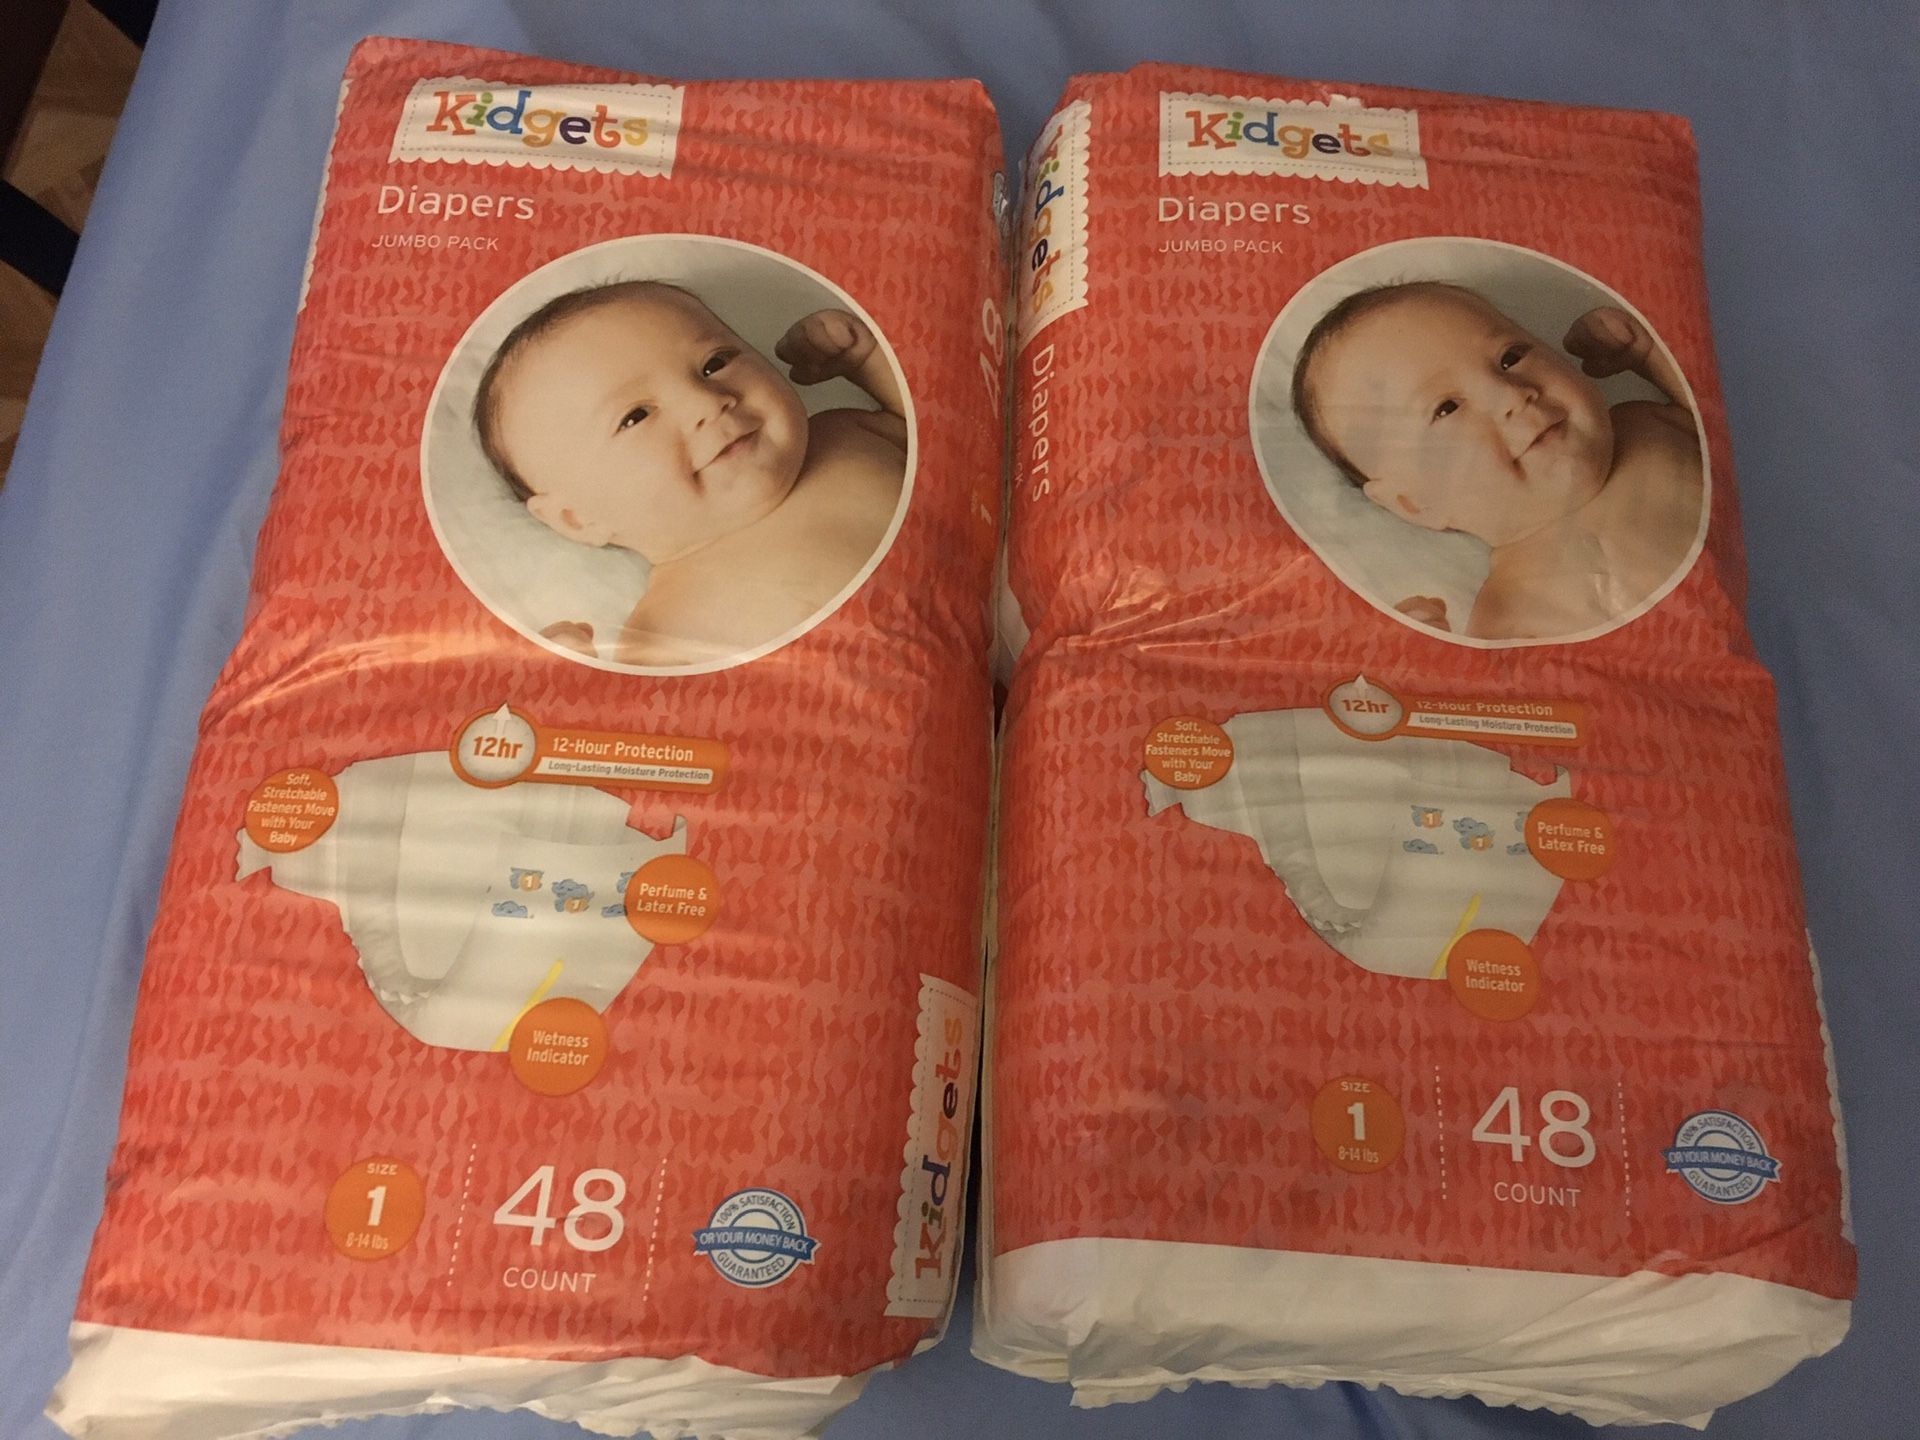 Kidgets baby diapers size 1